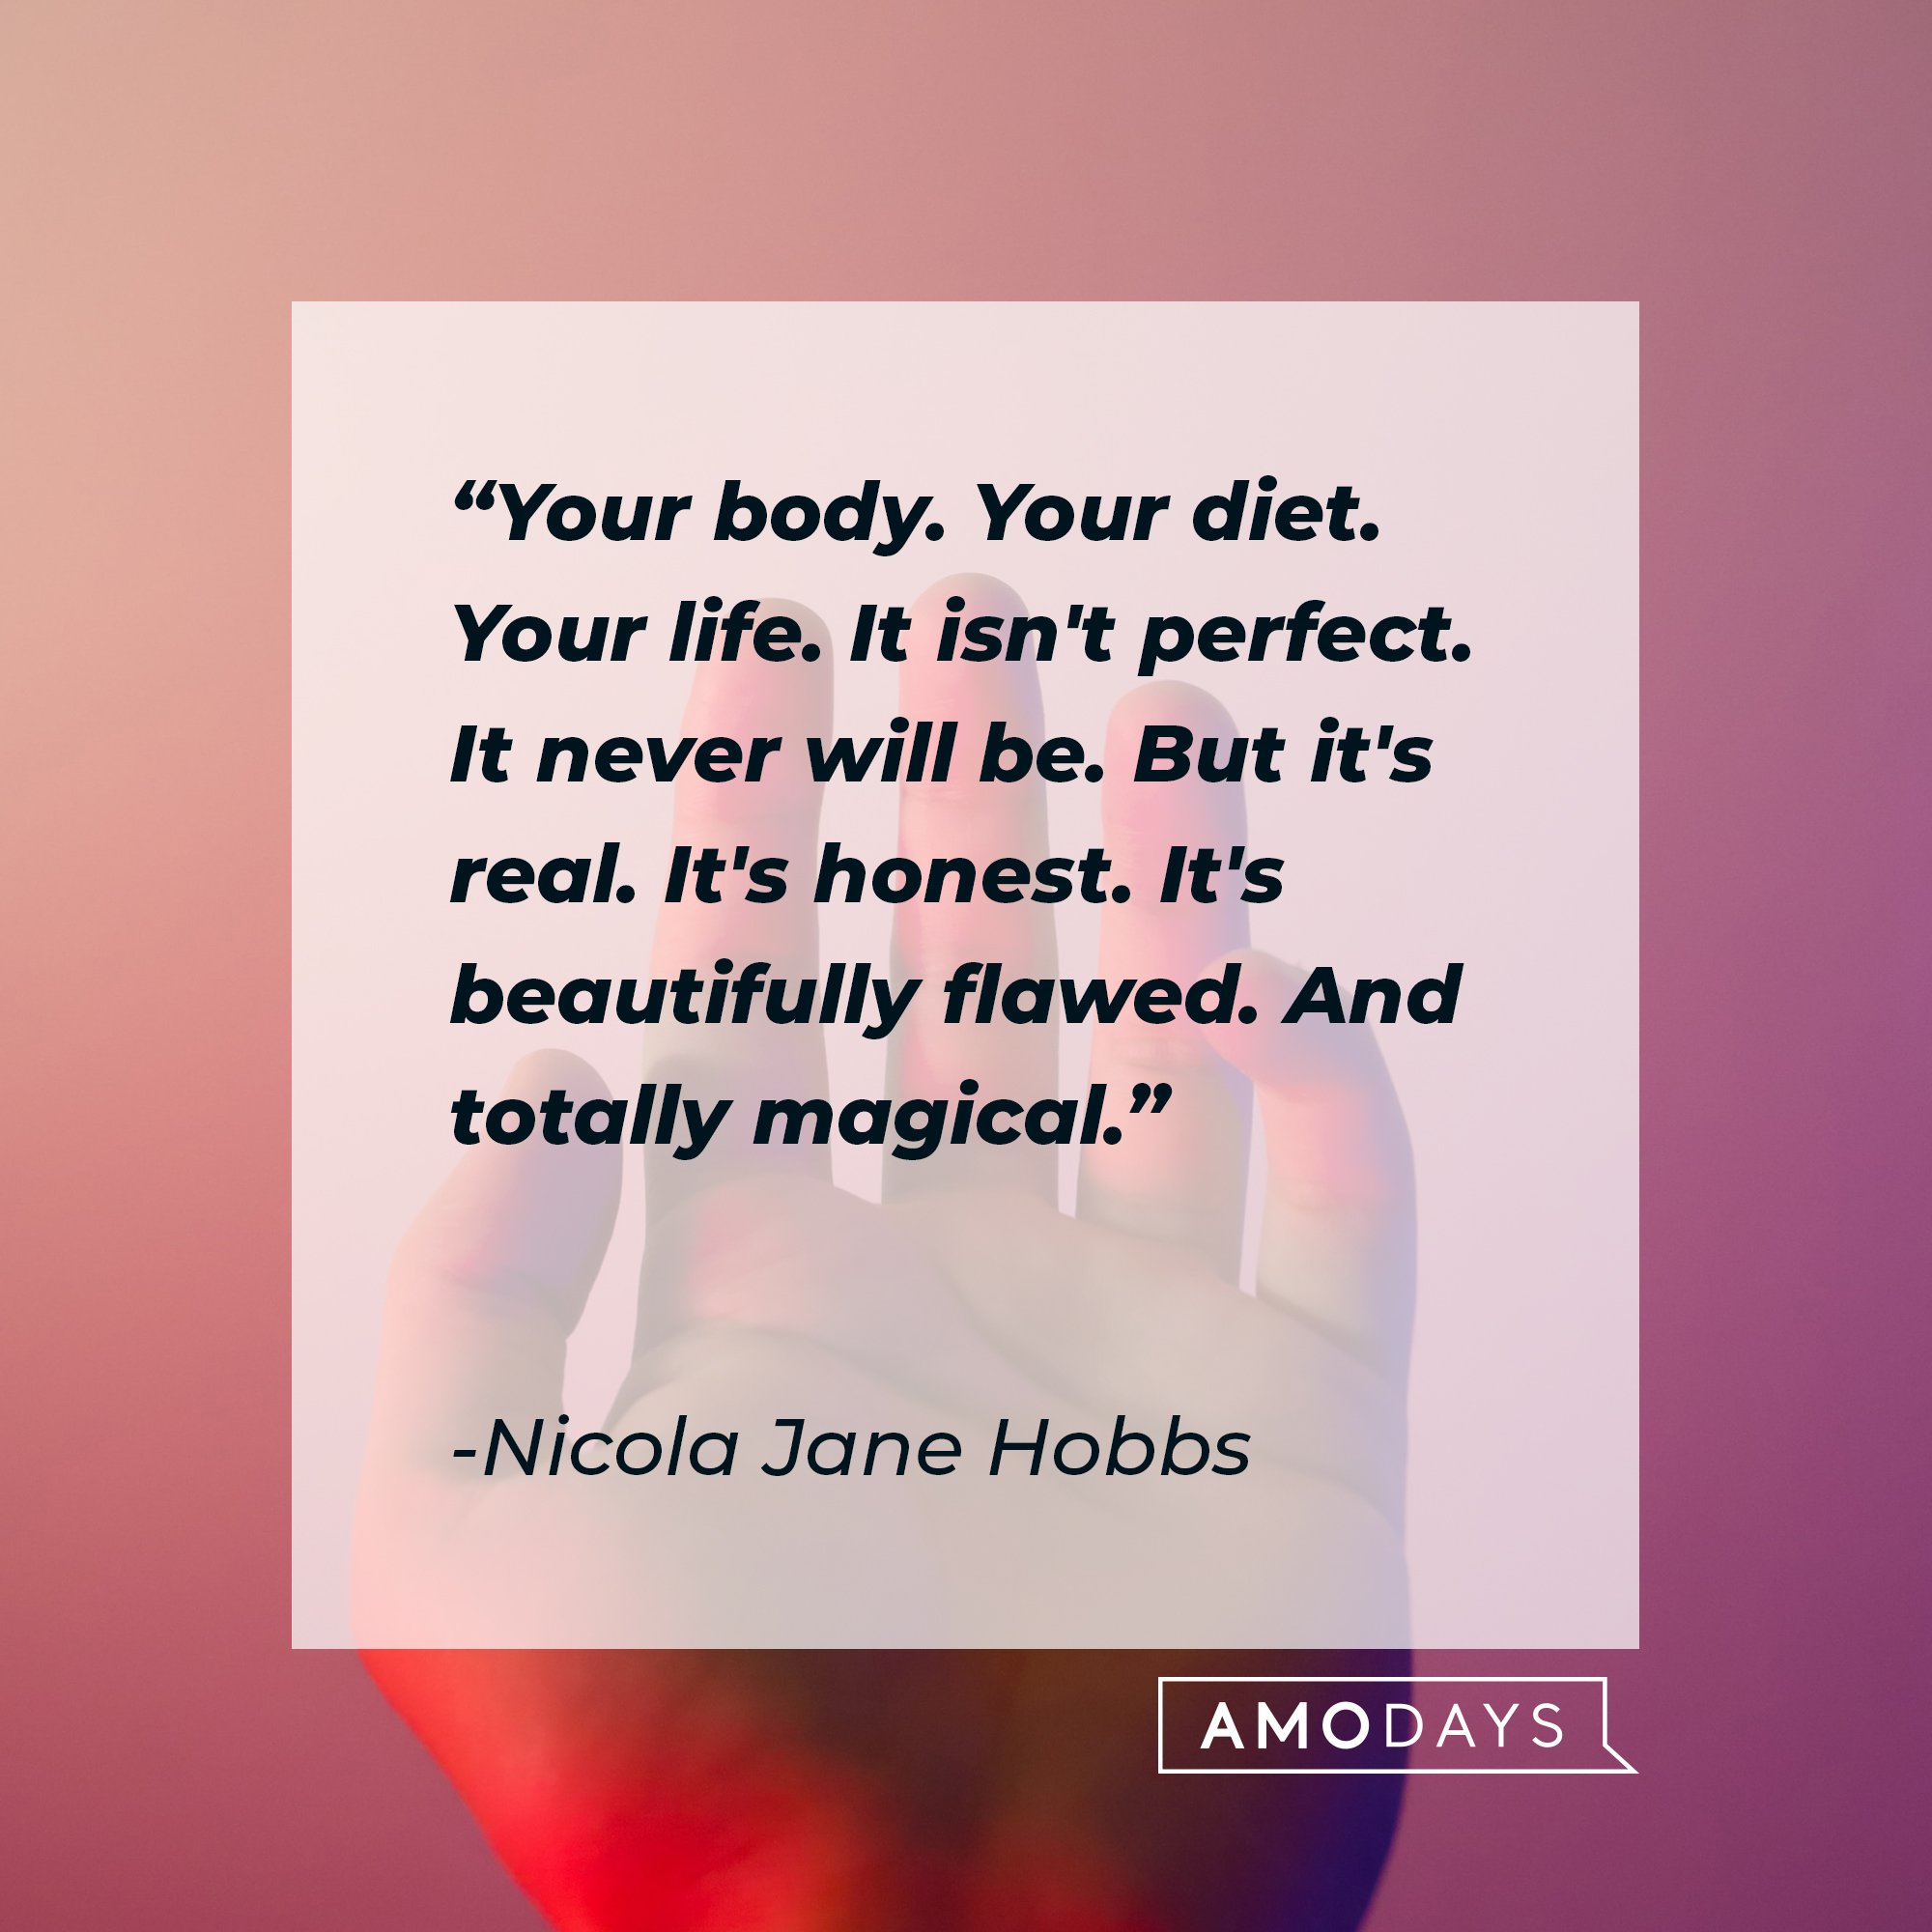 Nicola Jane Hobbs’ quote: "Your body. Your diet. Your life. It isn't perfect. It never will be. But it's real. It's honest. It's beautifully flawed. And totally magical." | Image: AmoDays